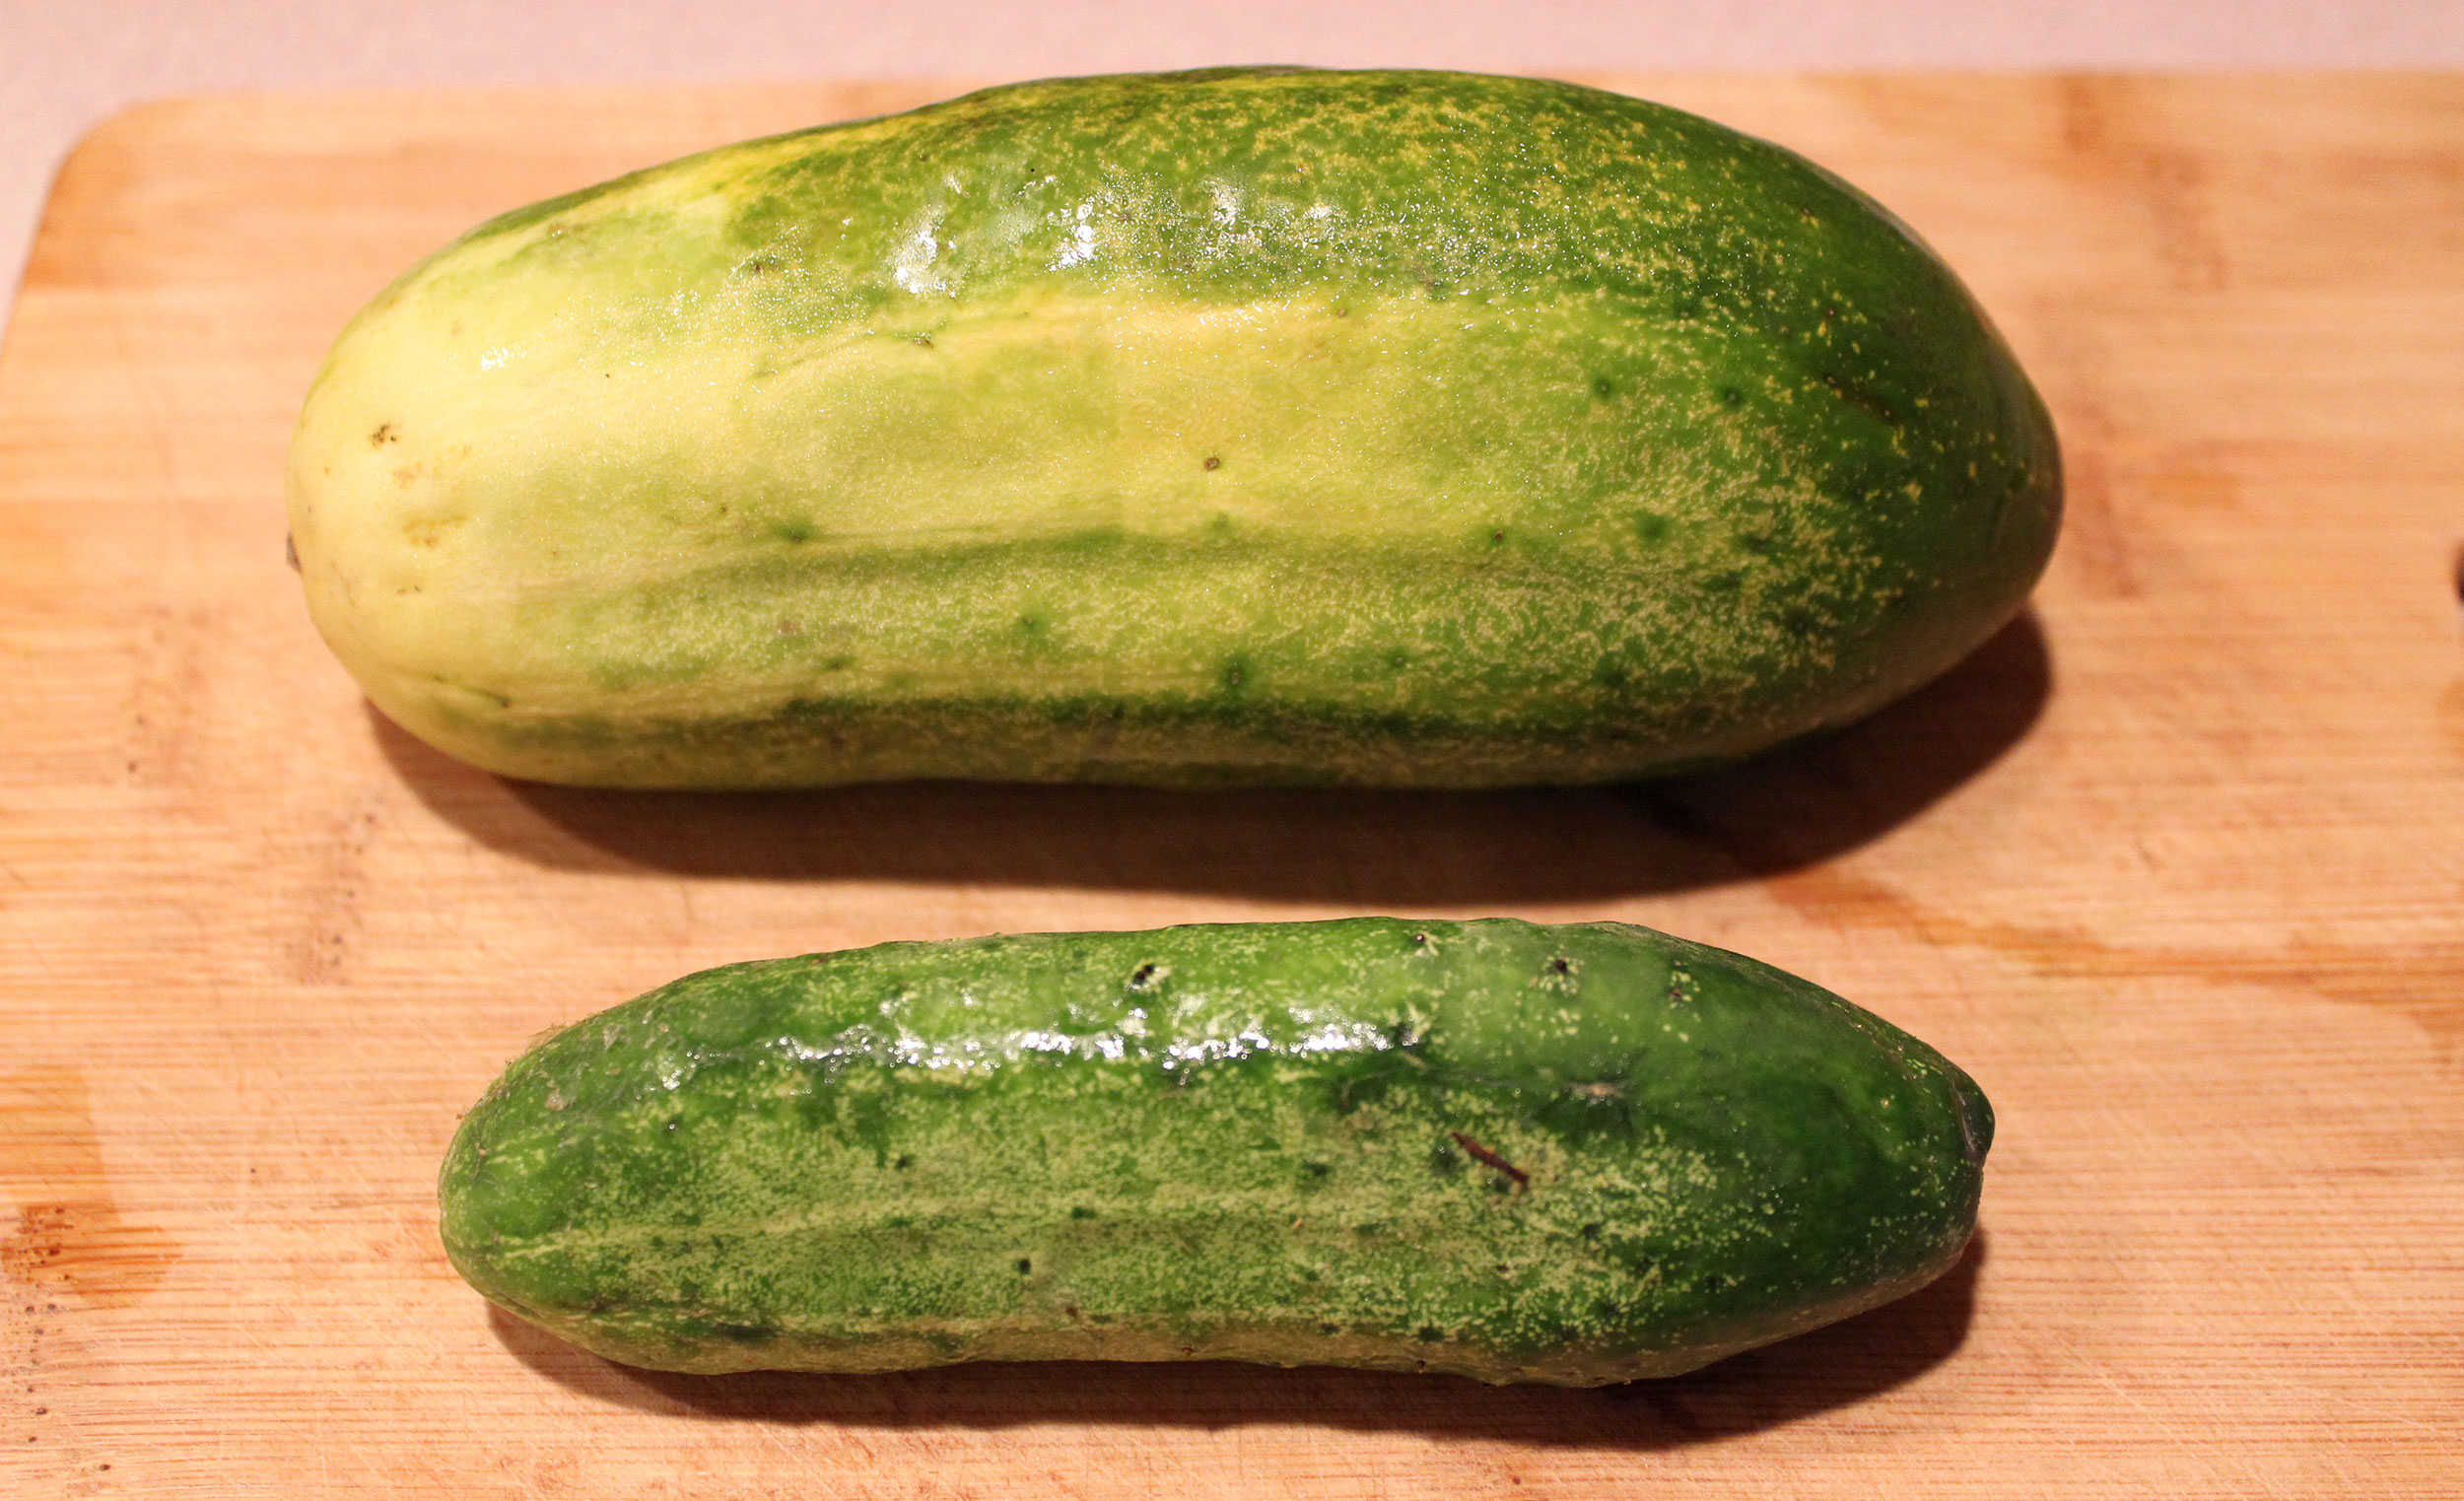 two cucumbers. the one on the top is larger and has begun yellowing. the bottom is smaller and is a crisp green color.